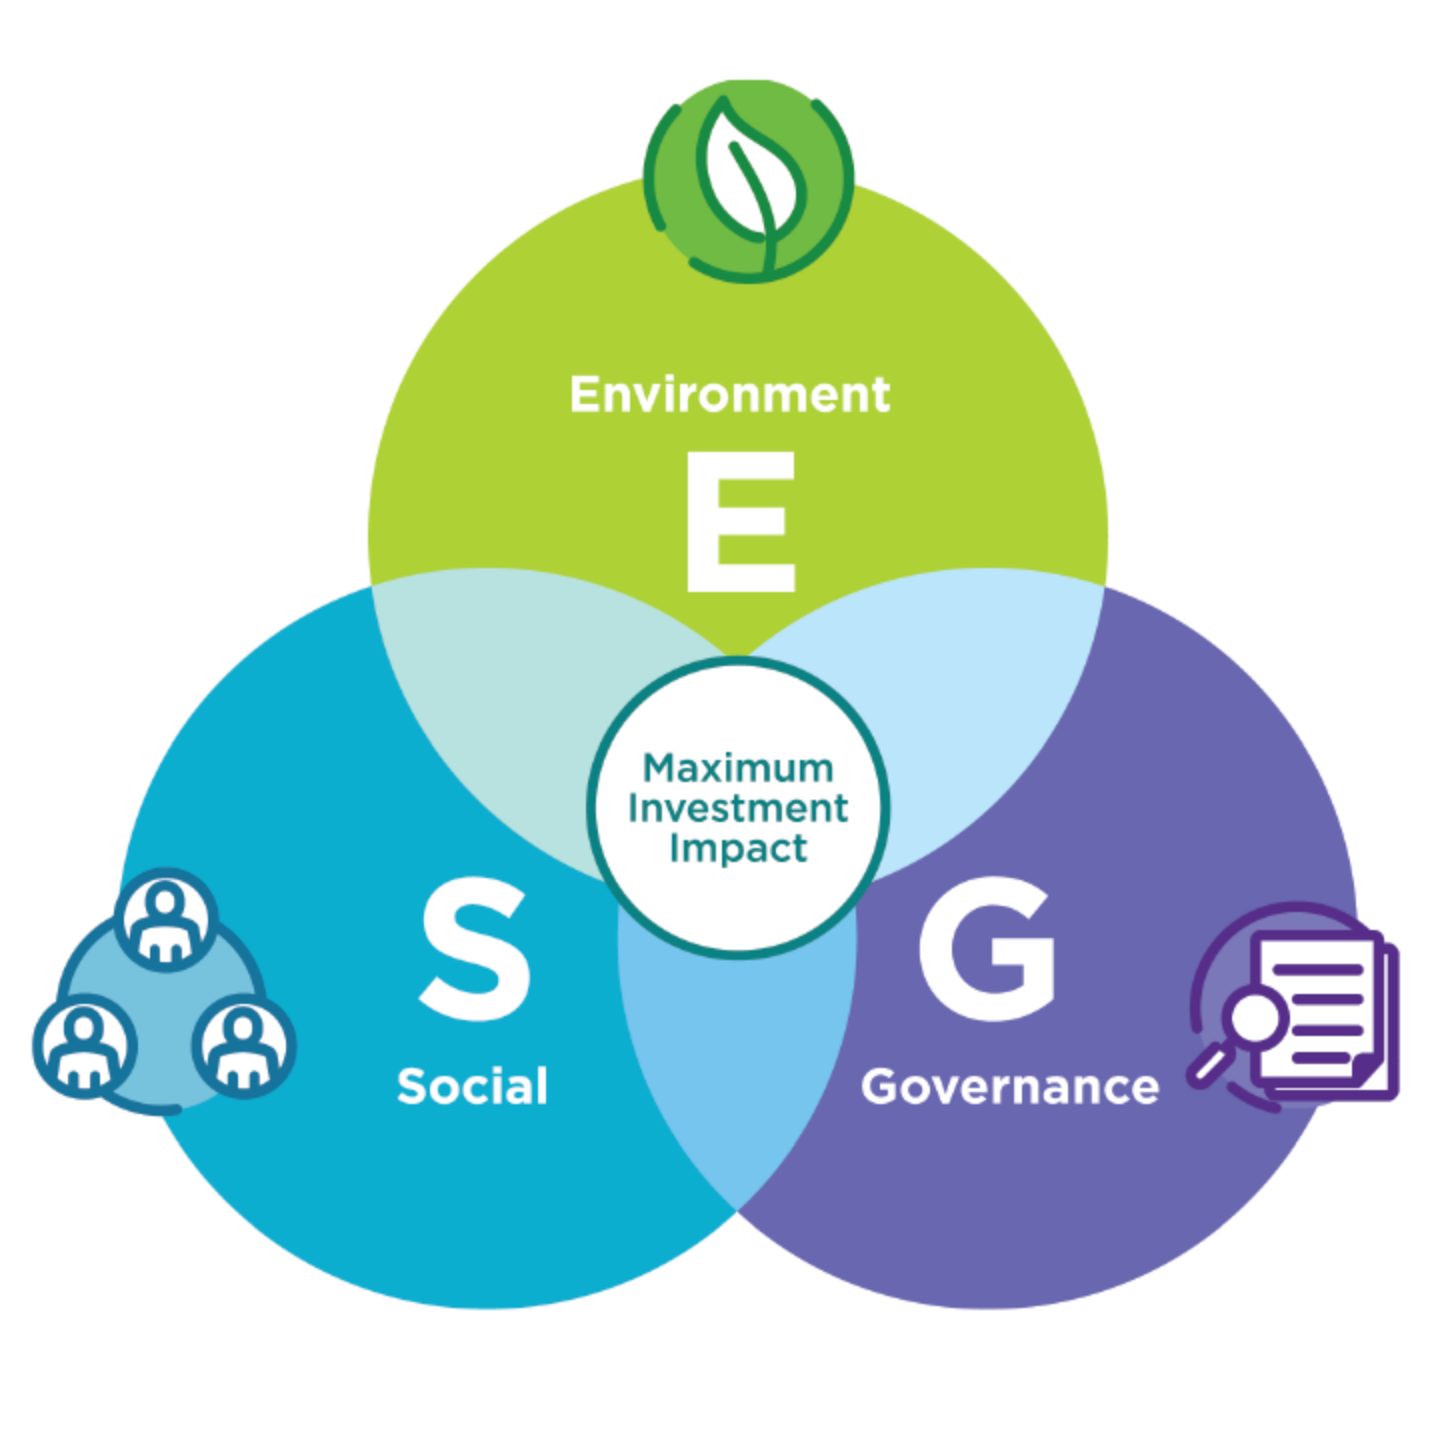 Environment Social Governance leads to Maximum Investment Impact